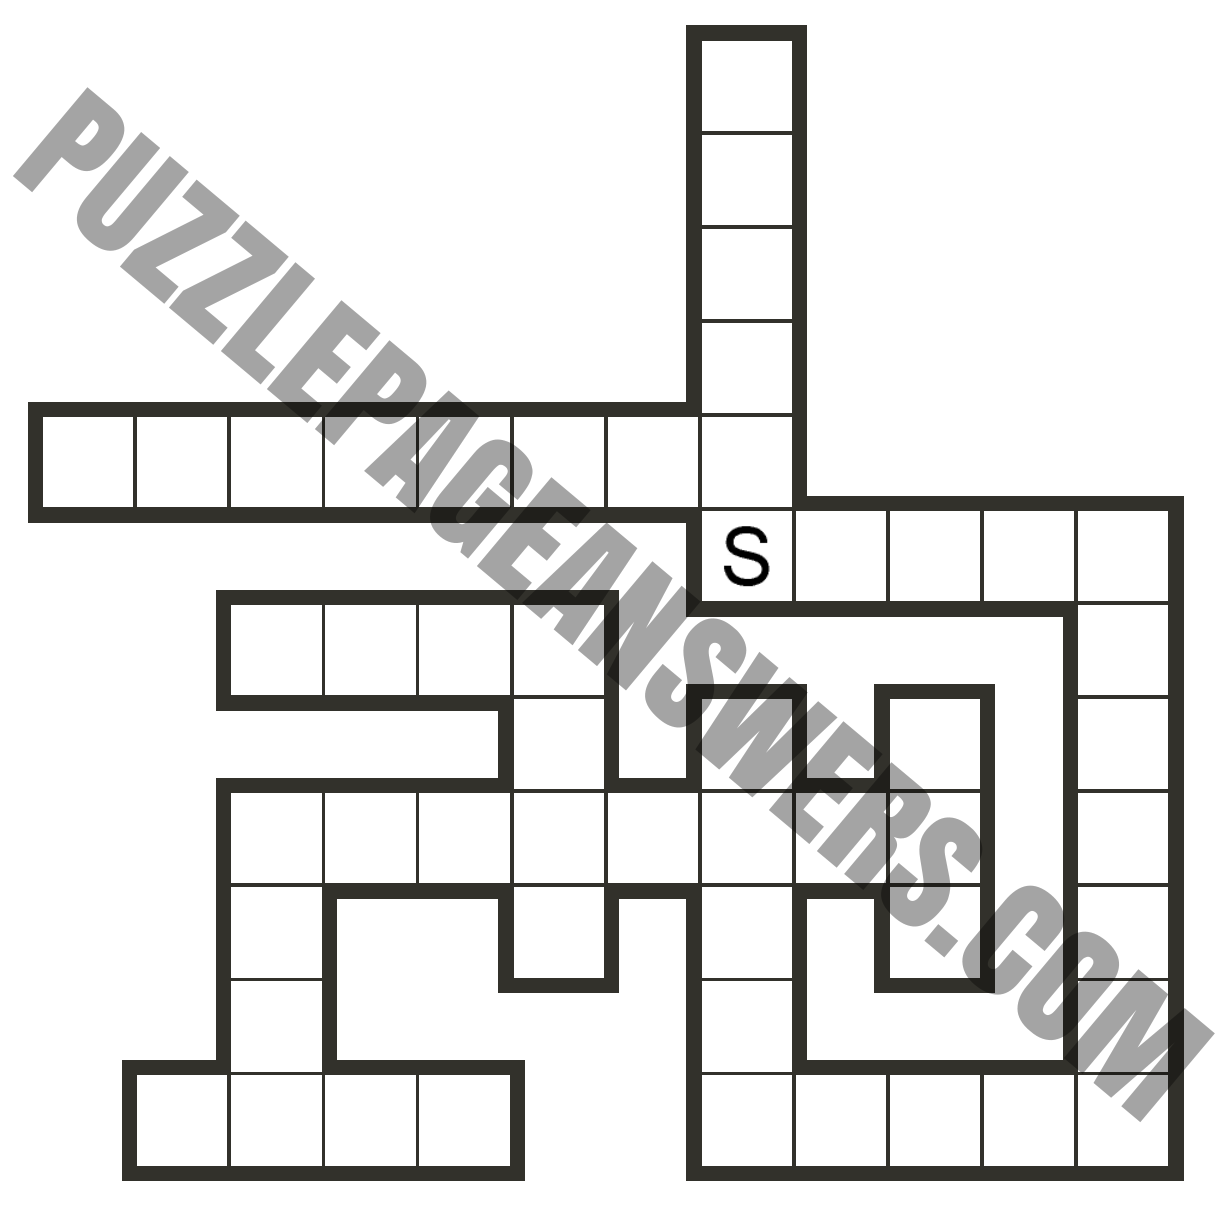 Puzzle Page One Clue May 2 2020  PuzzlePageAnswers.com